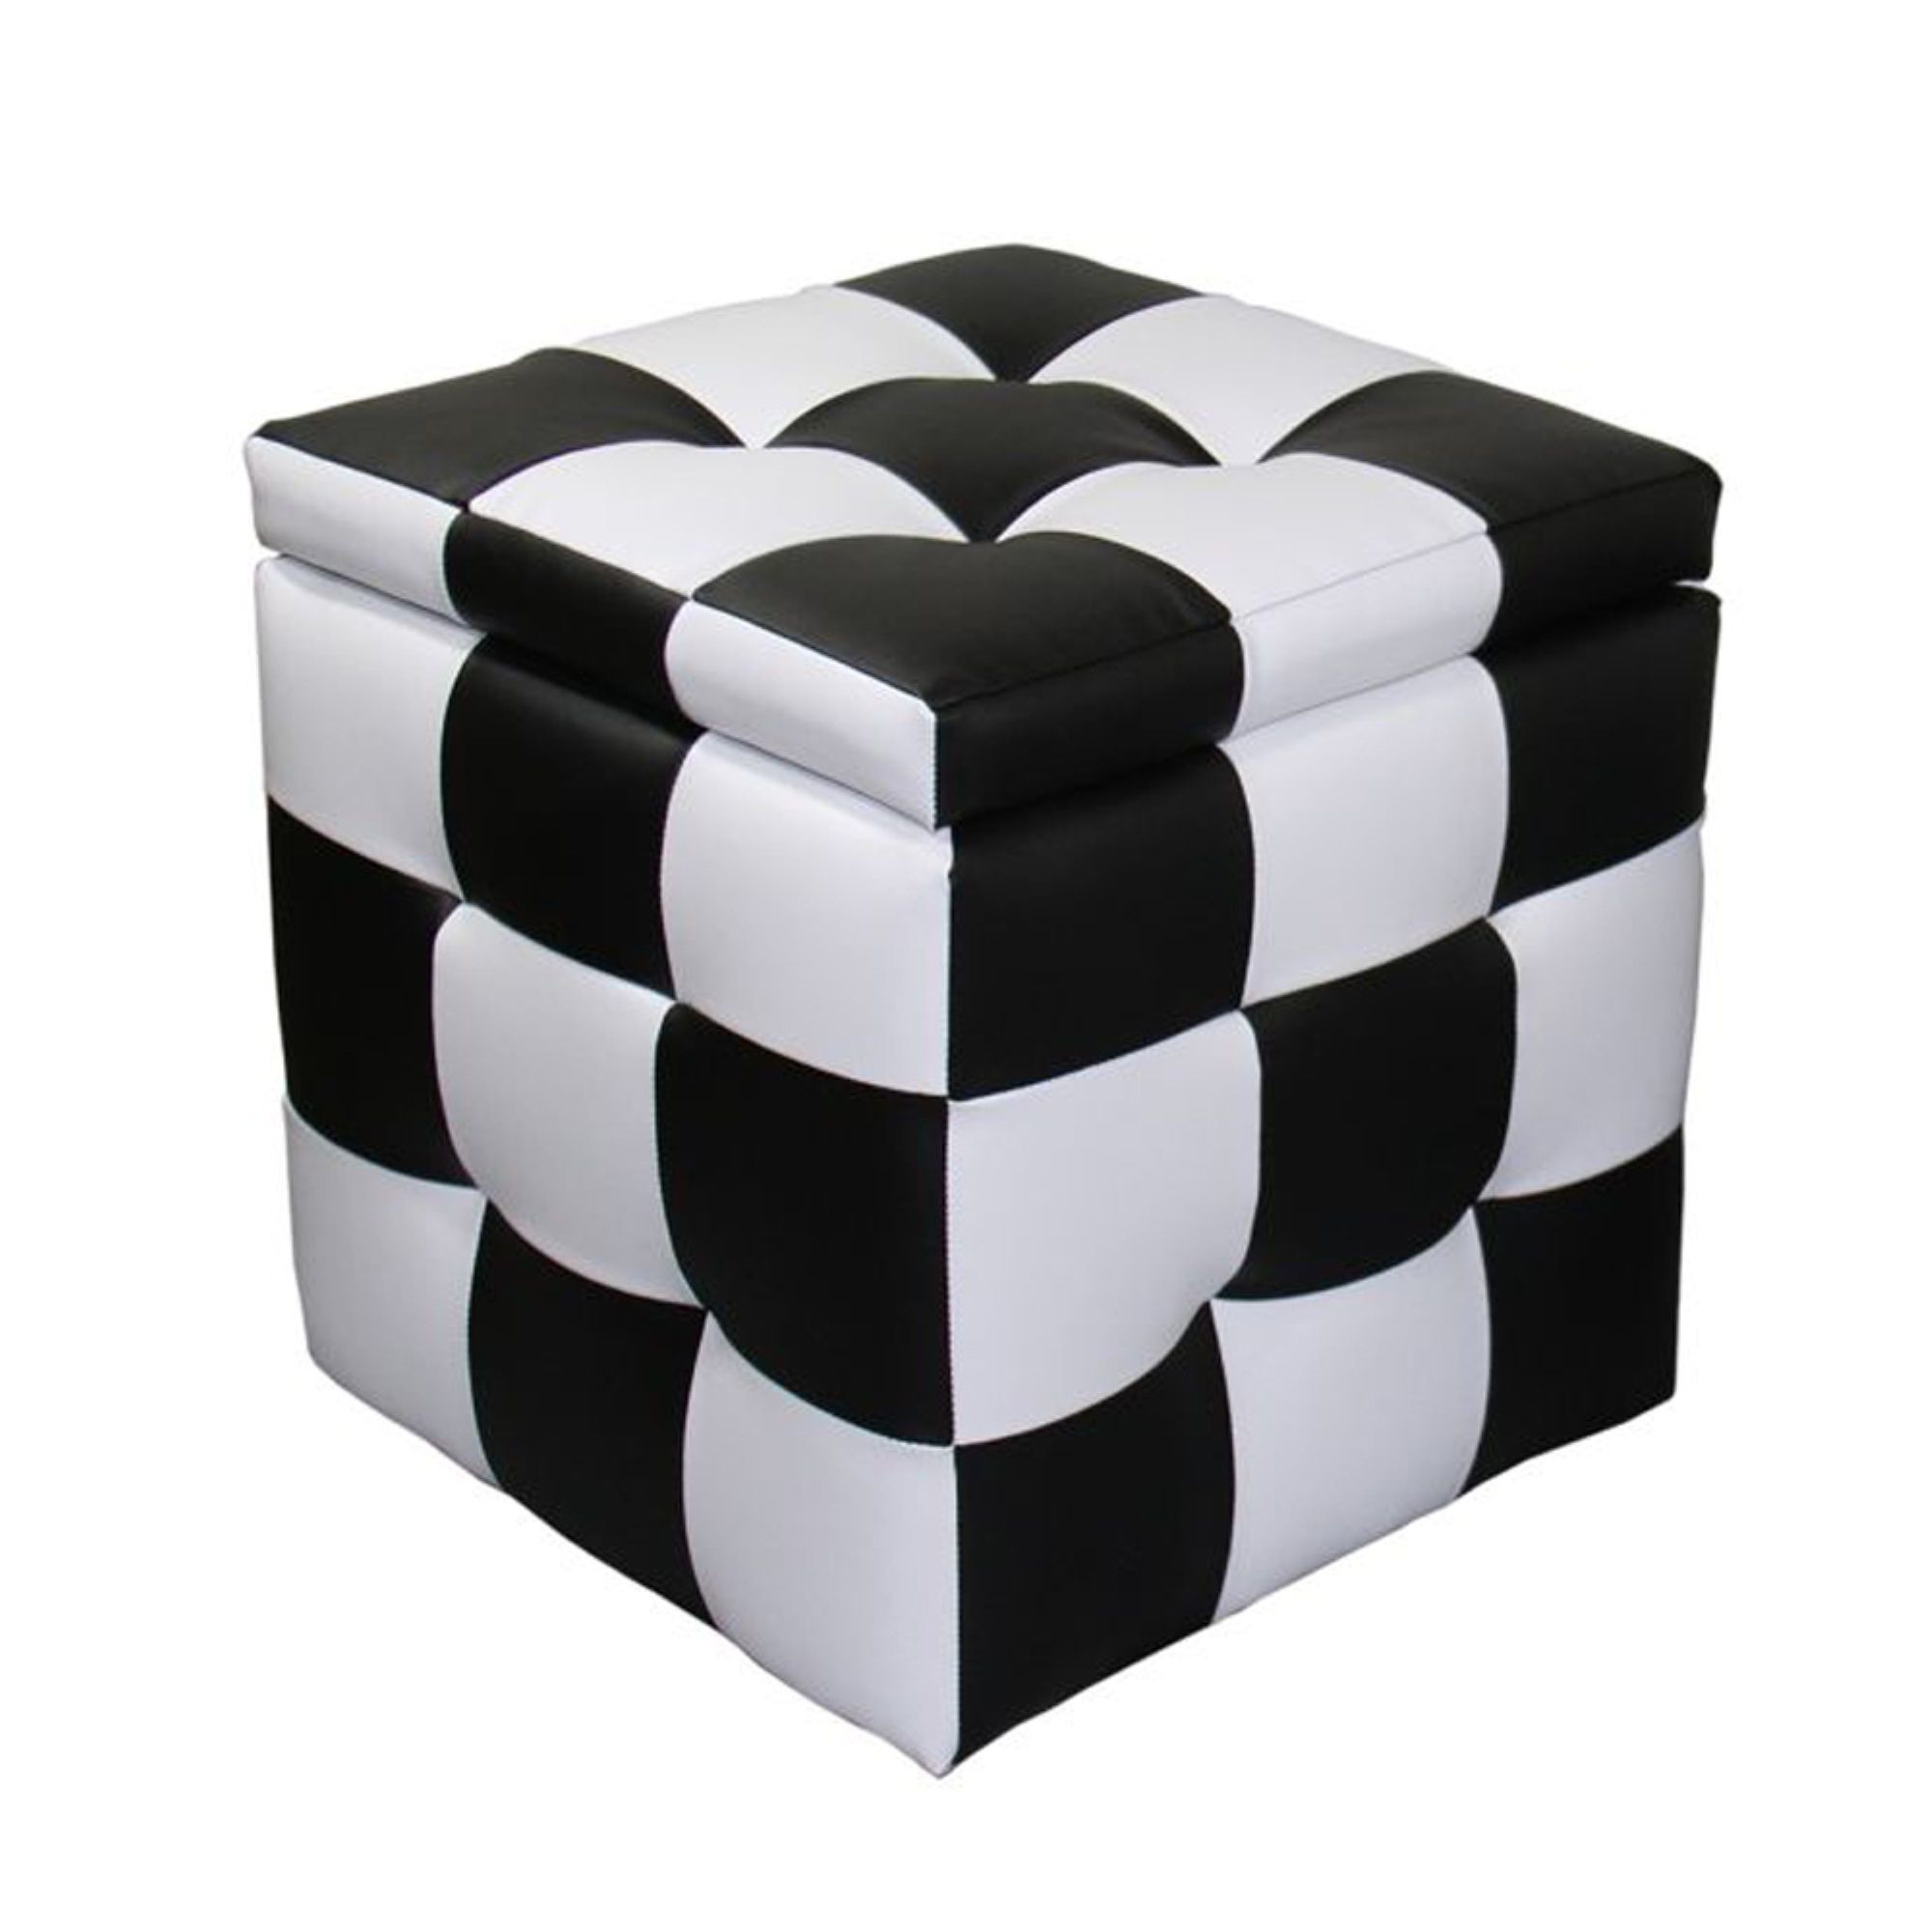 2 Piece Tufted Faux Leather Upholstered Storage Ottoman, Black And With Black And White Zigzag Pouf Ottomans (View 7 of 20)